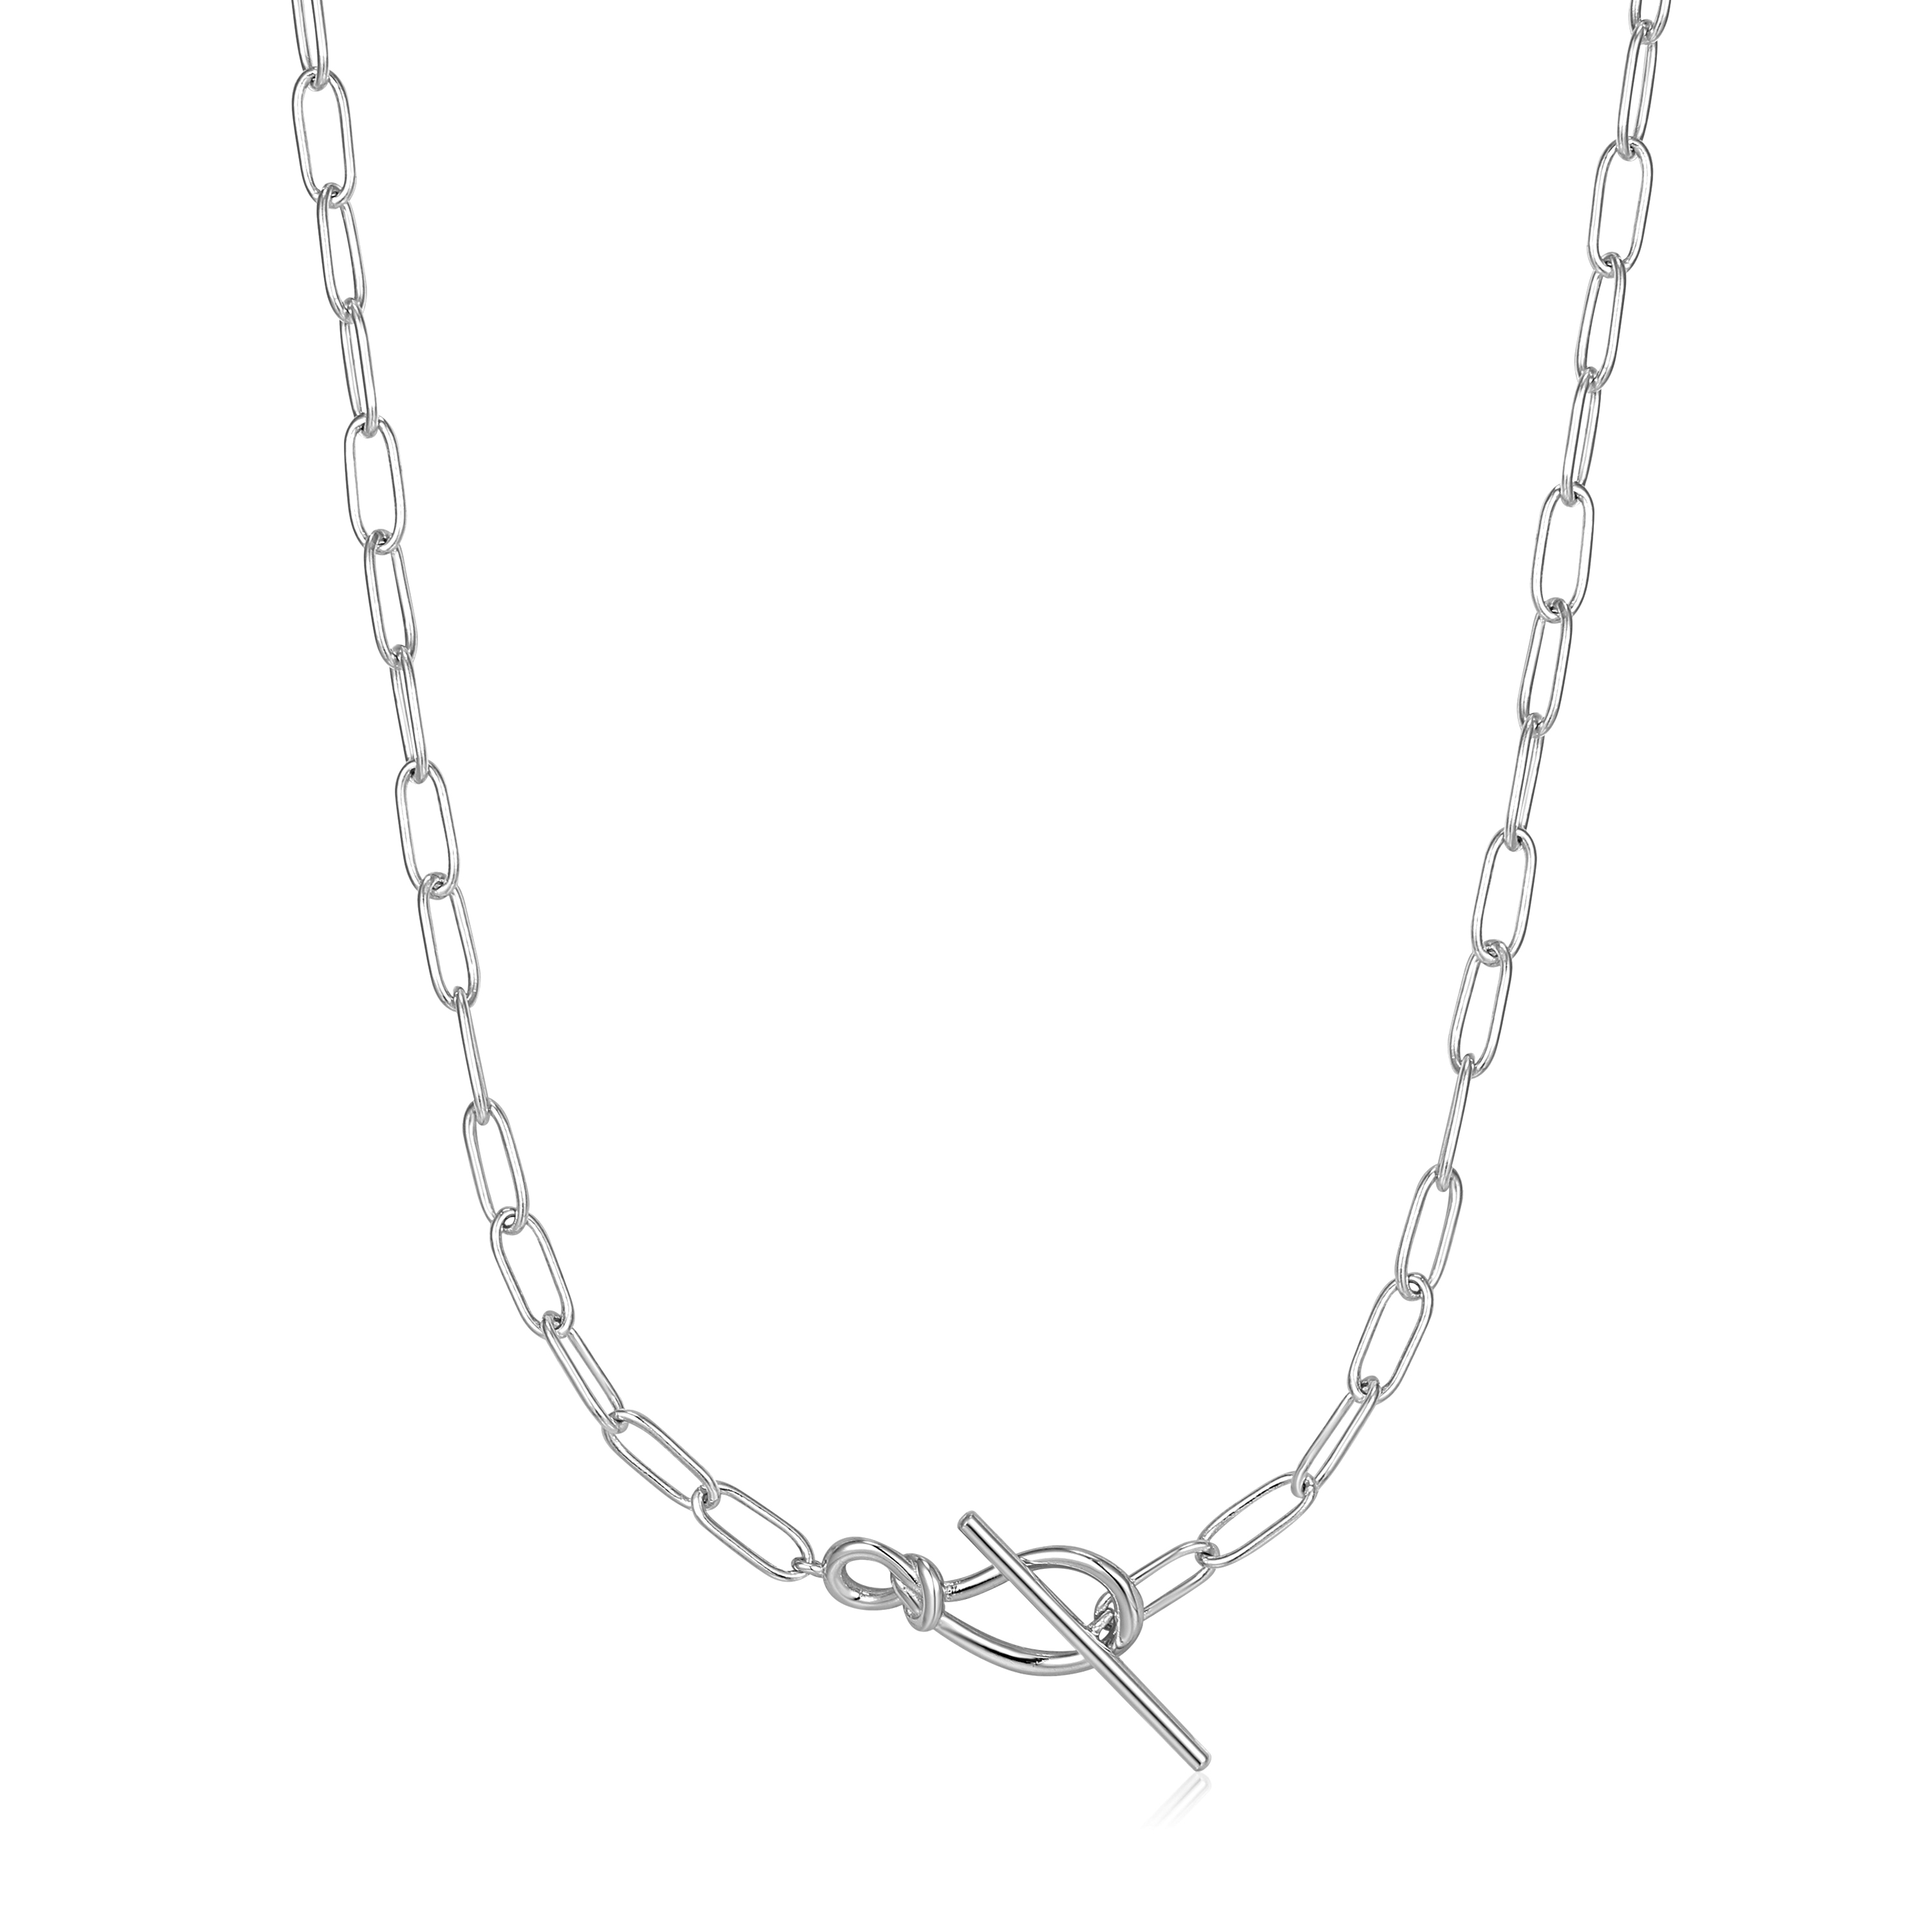 ANIA HAIE Silver Knot T Bar Chain Necklace